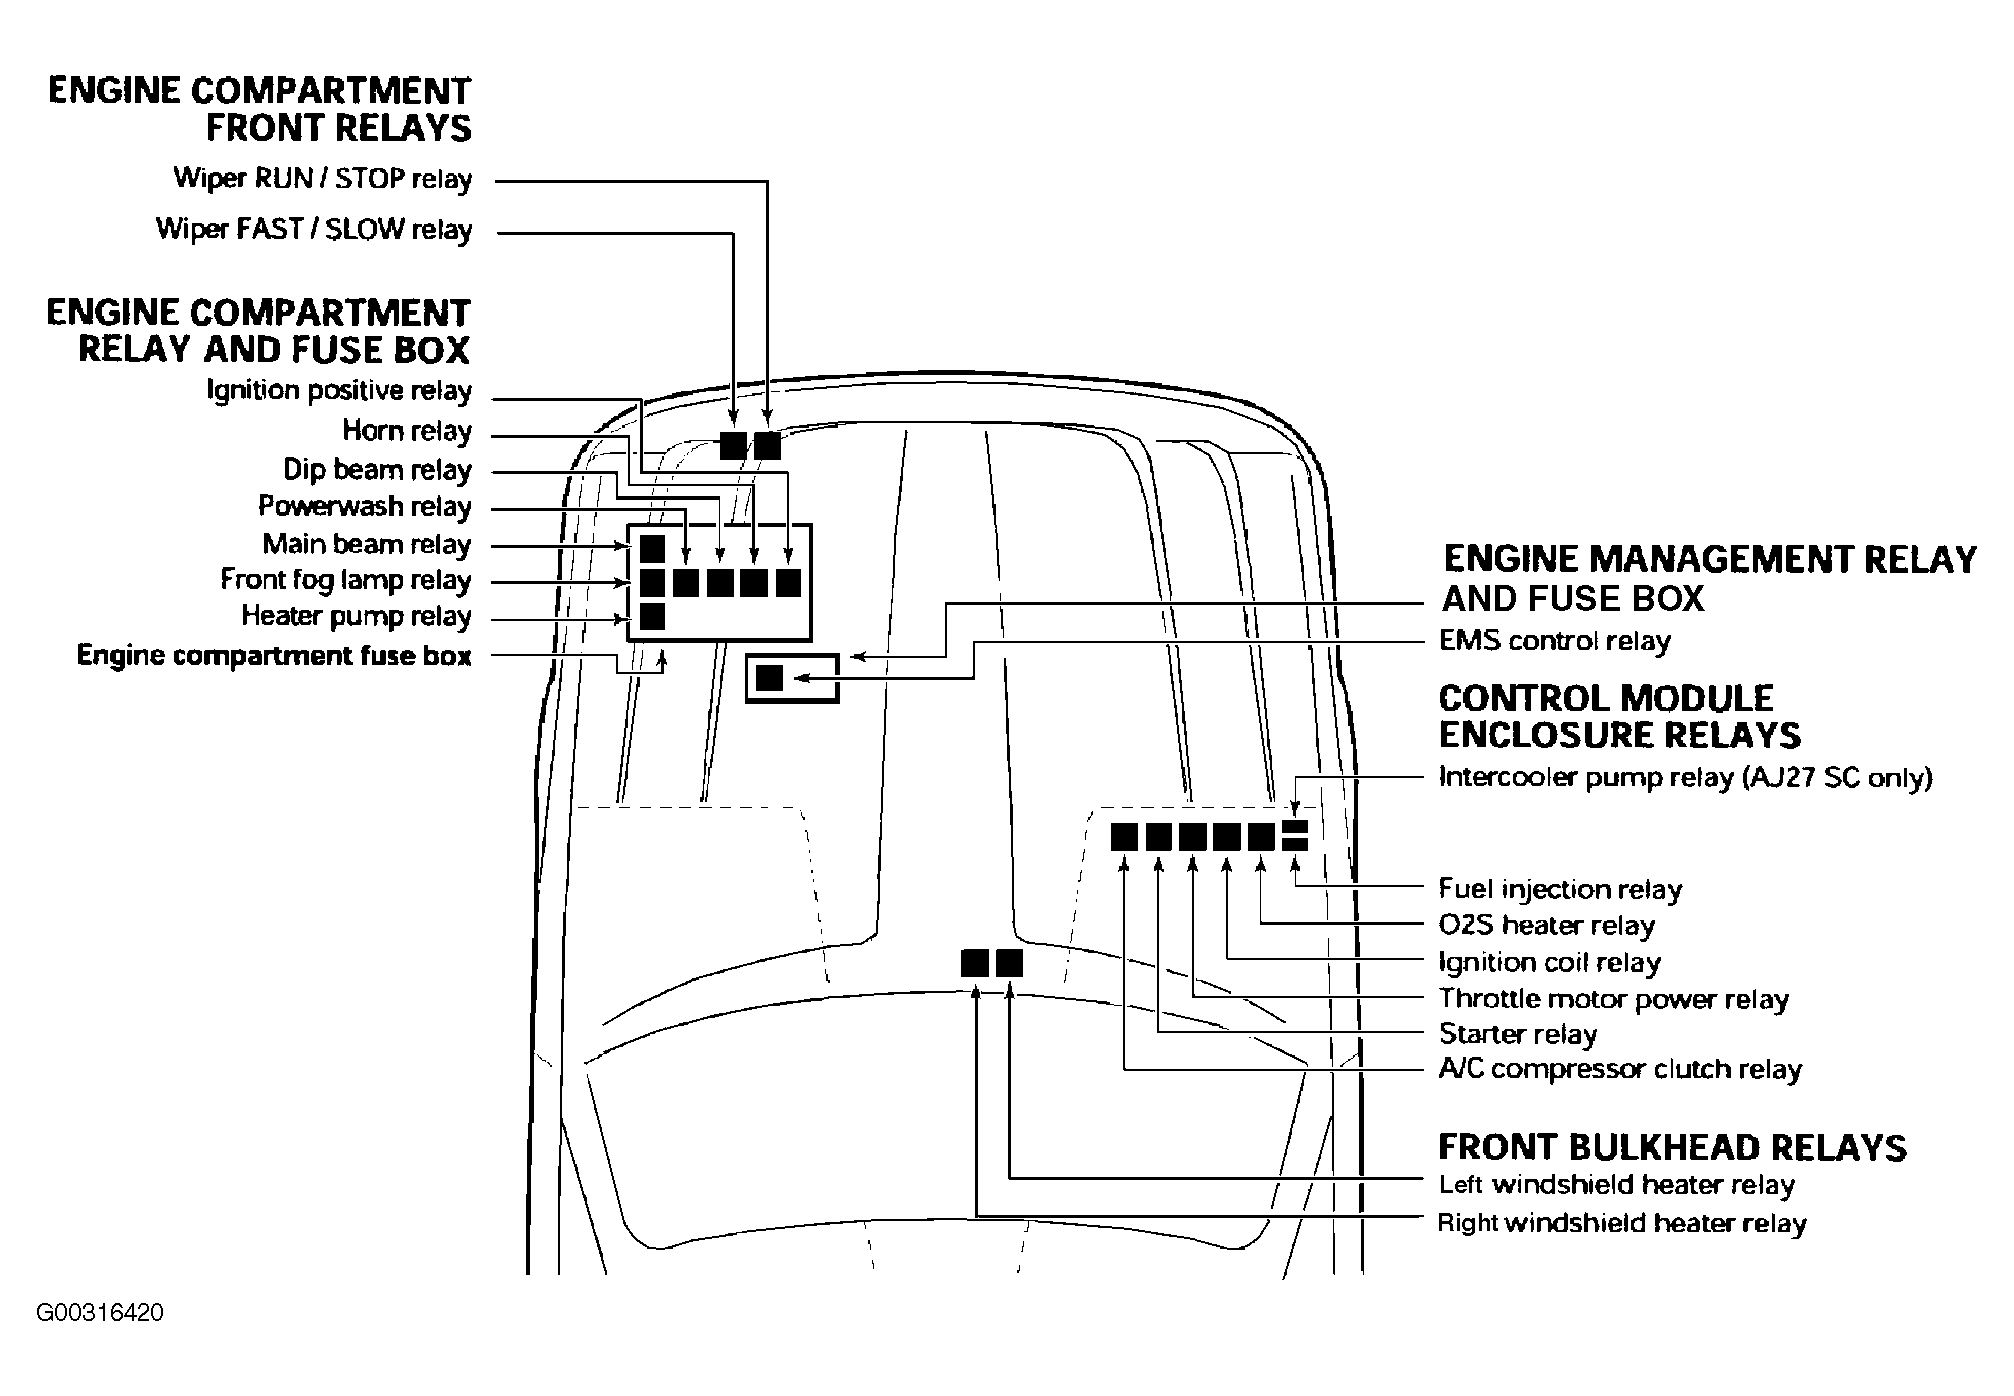 Jaguar XJR 2000 - Component Locations -  Identifying Engine Compartment Fuse/Relay Locations